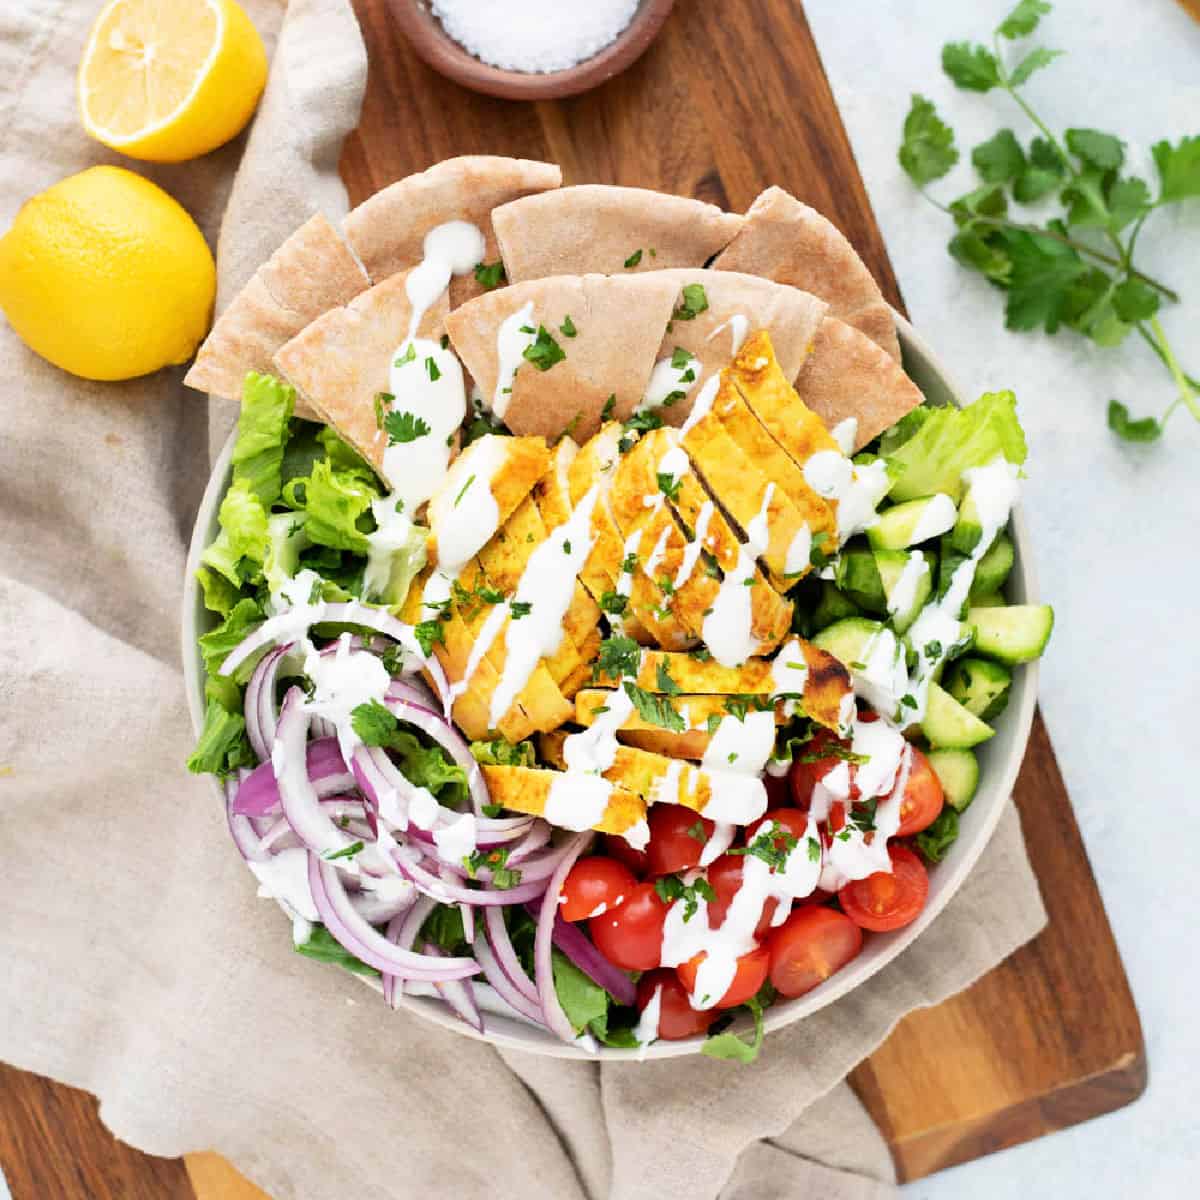 This chicken shawarma salad is easy and delicious. It's loaded with juicy and flavorful chicken, vegetables, and a delicious yogurt sauce! 
